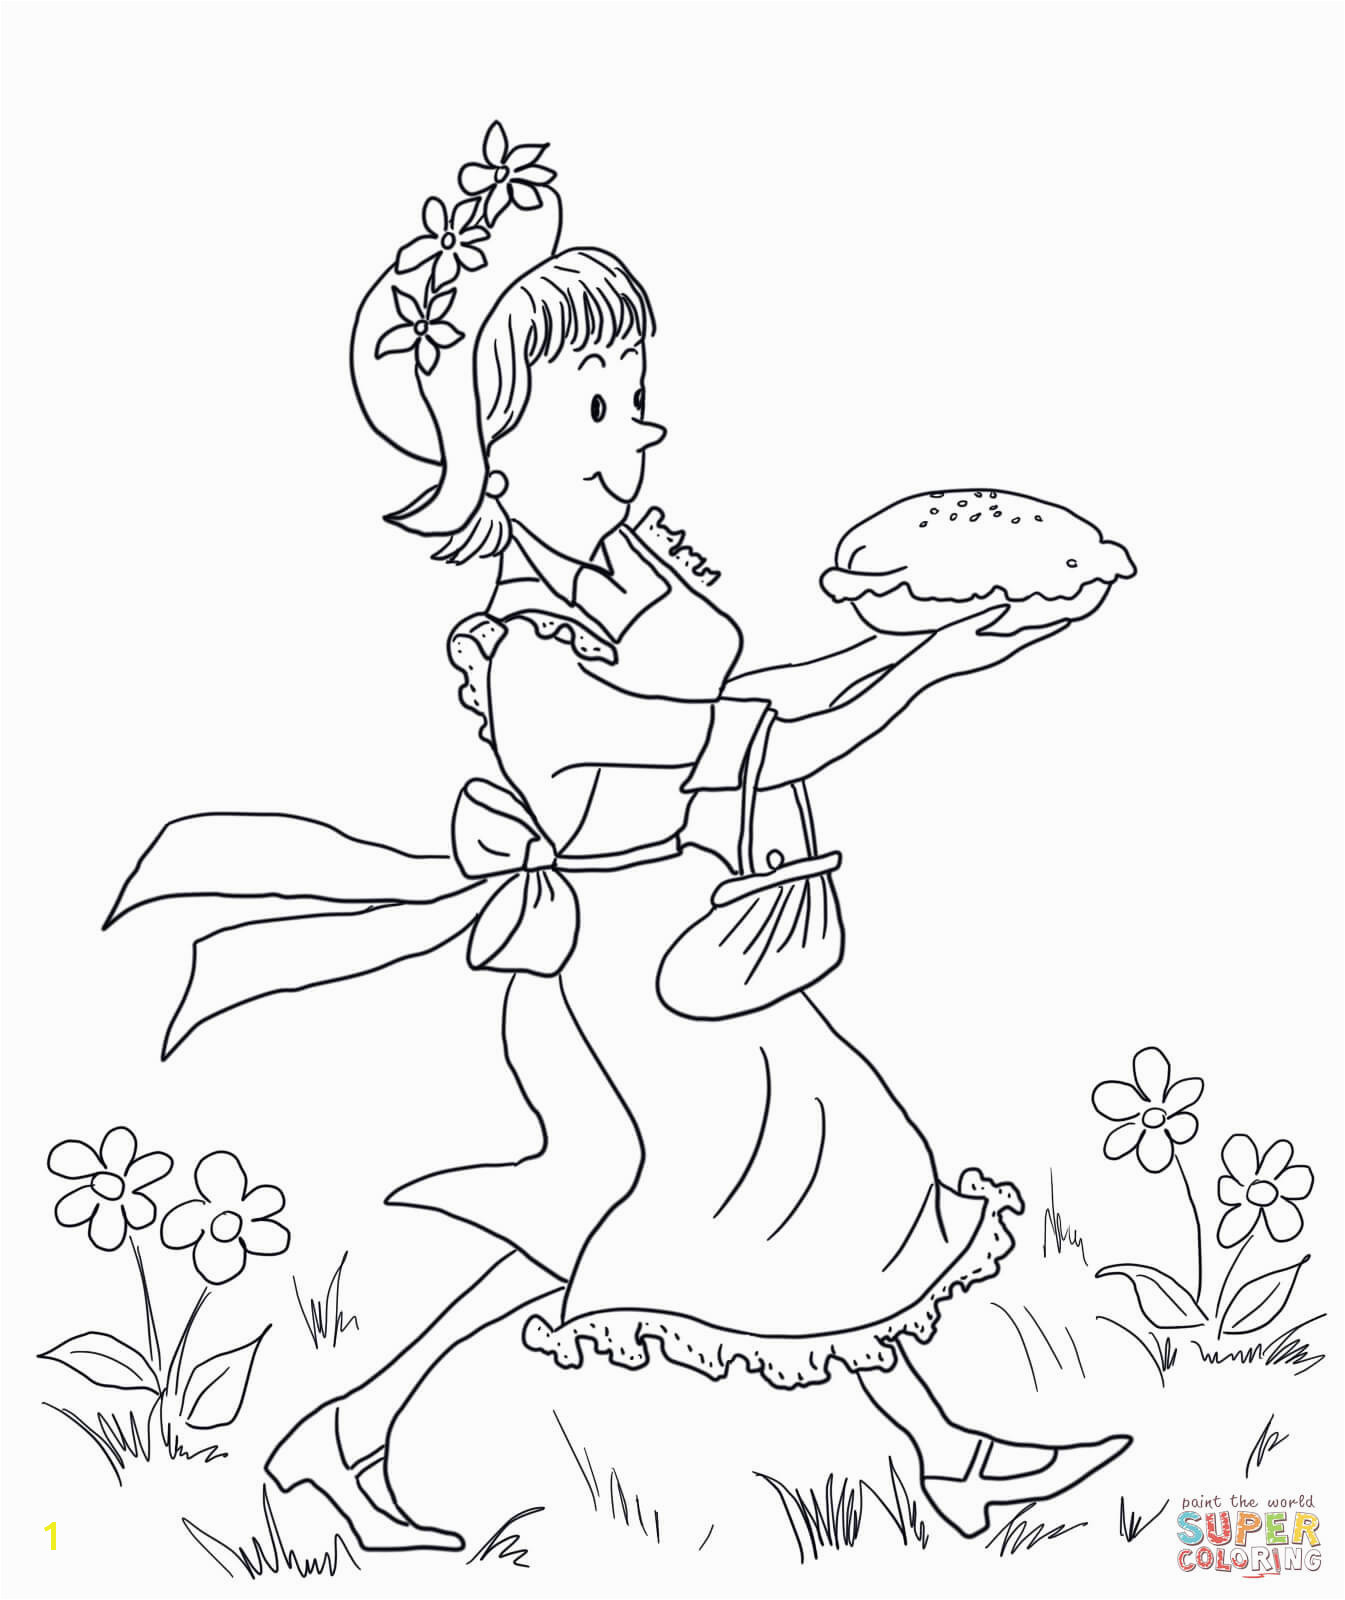 Amelia Earhart Coloring Pages